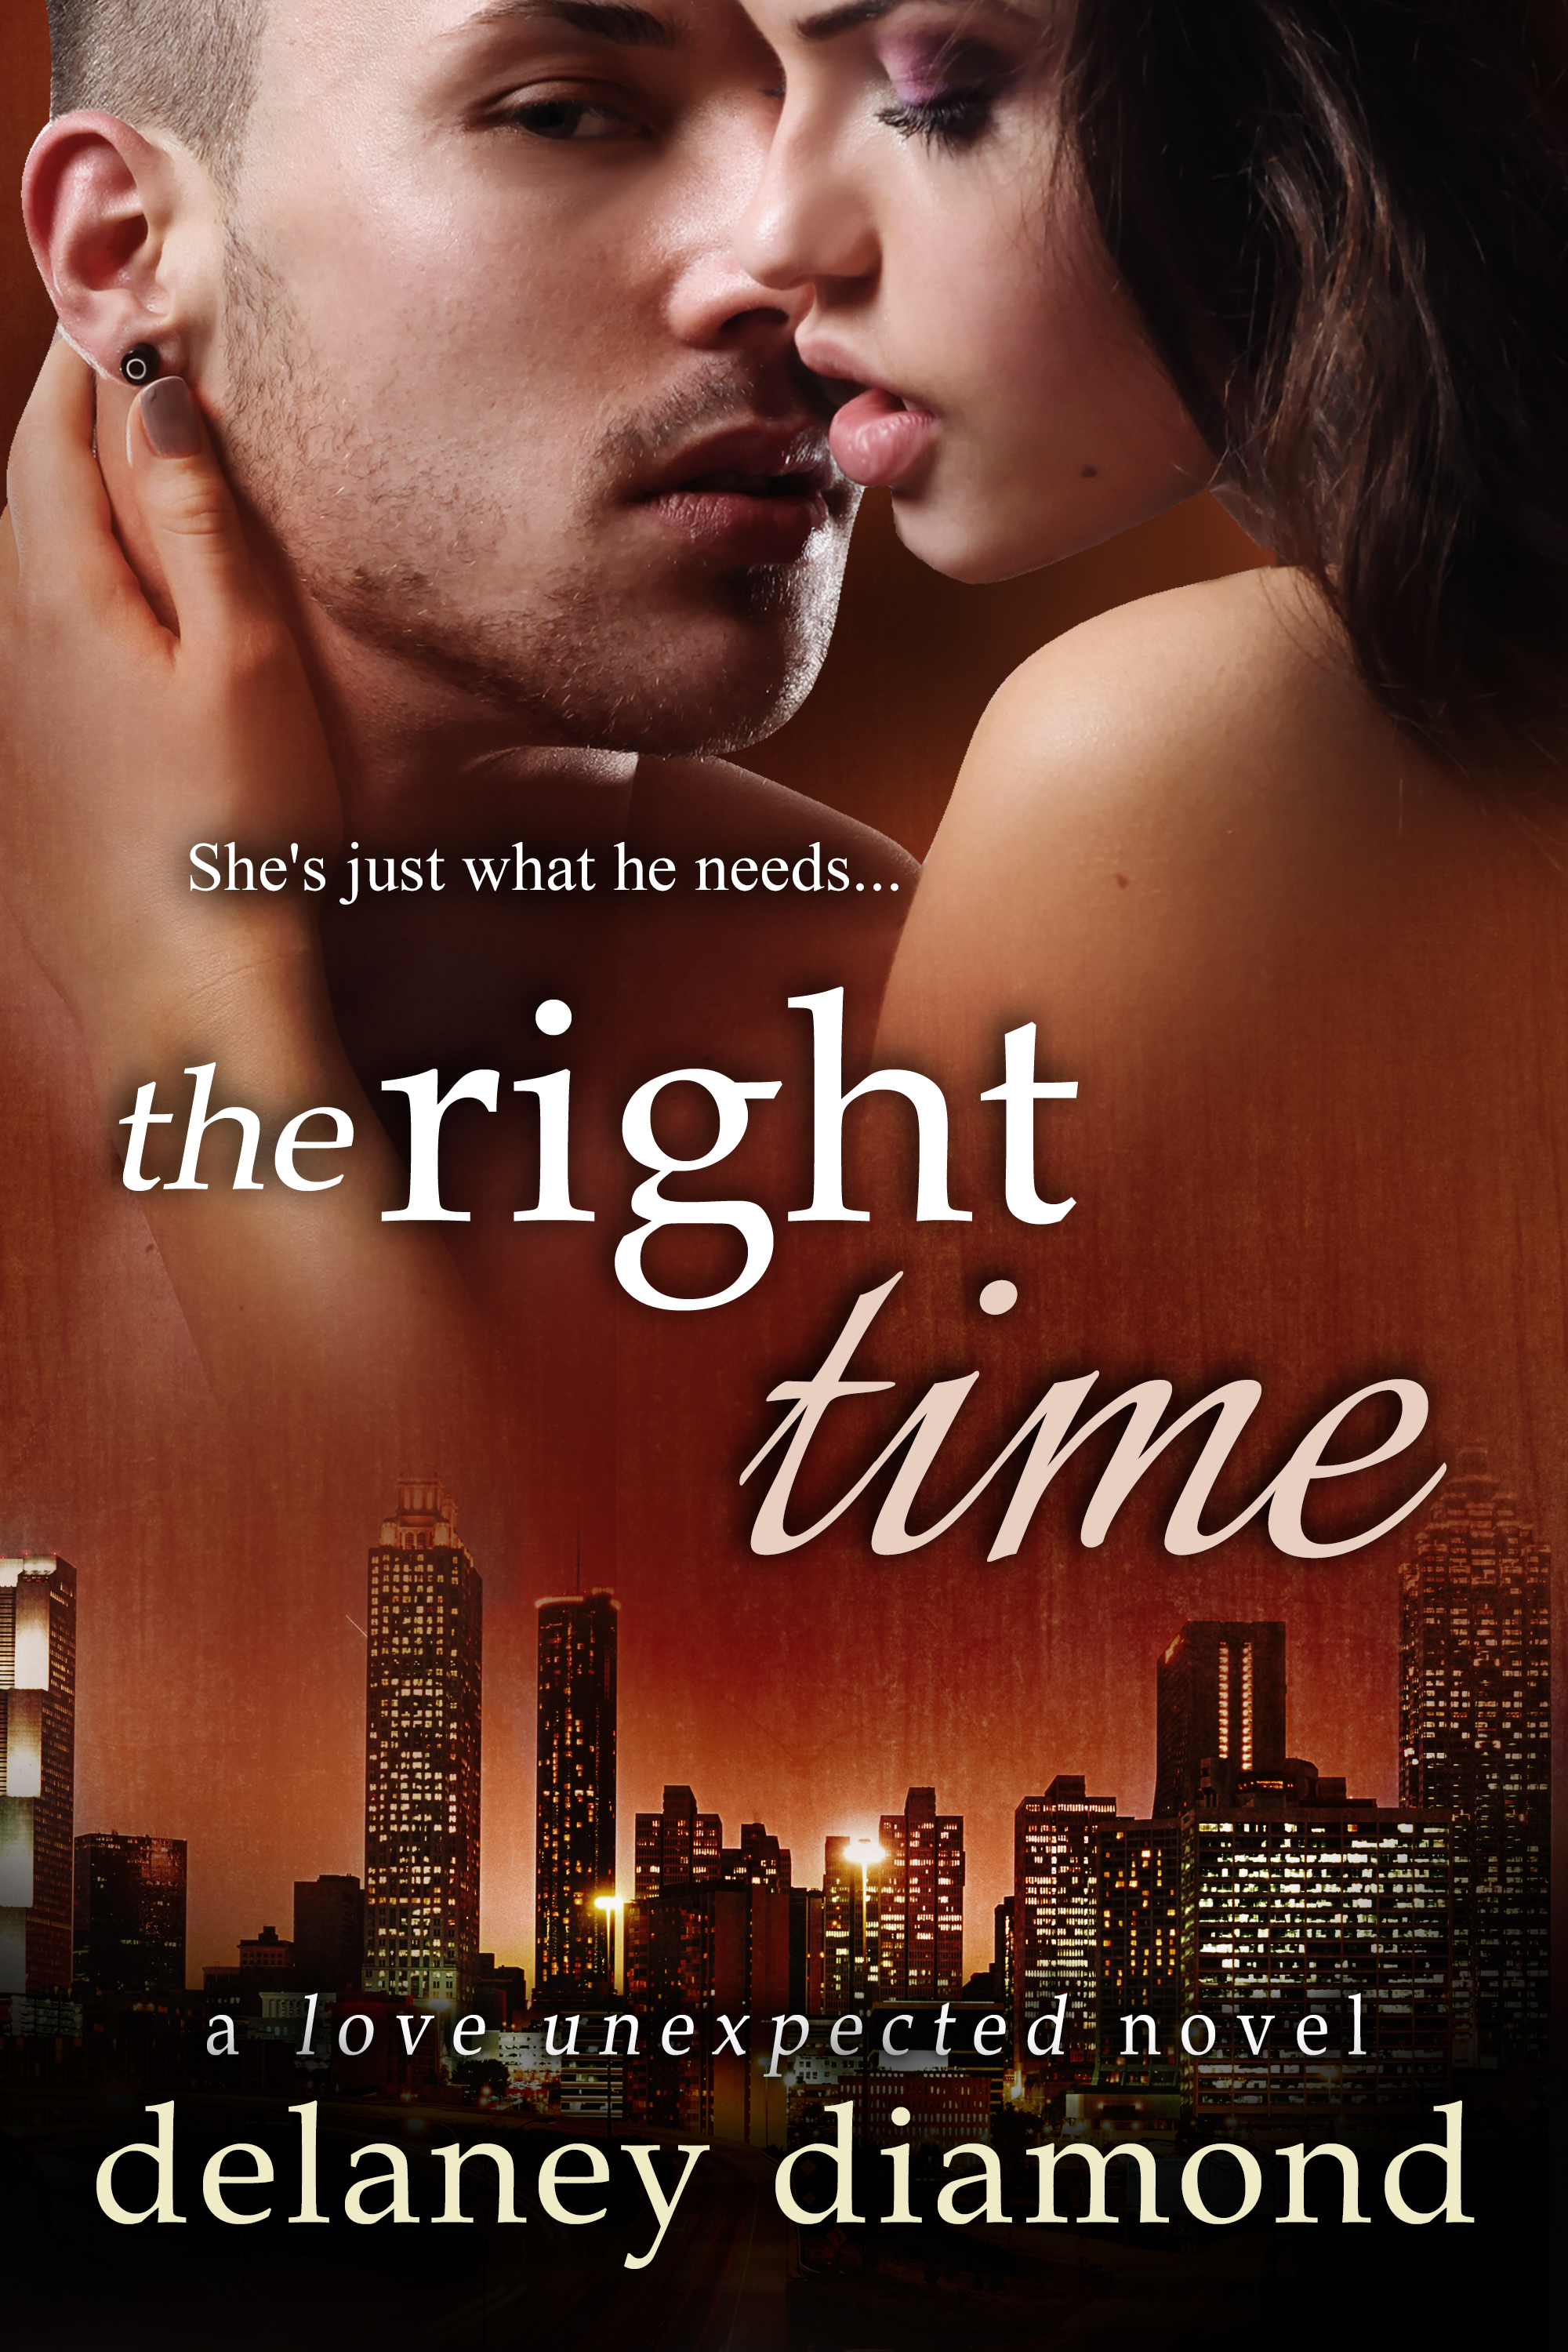 The Right Time (2016) by Delaney Diamond